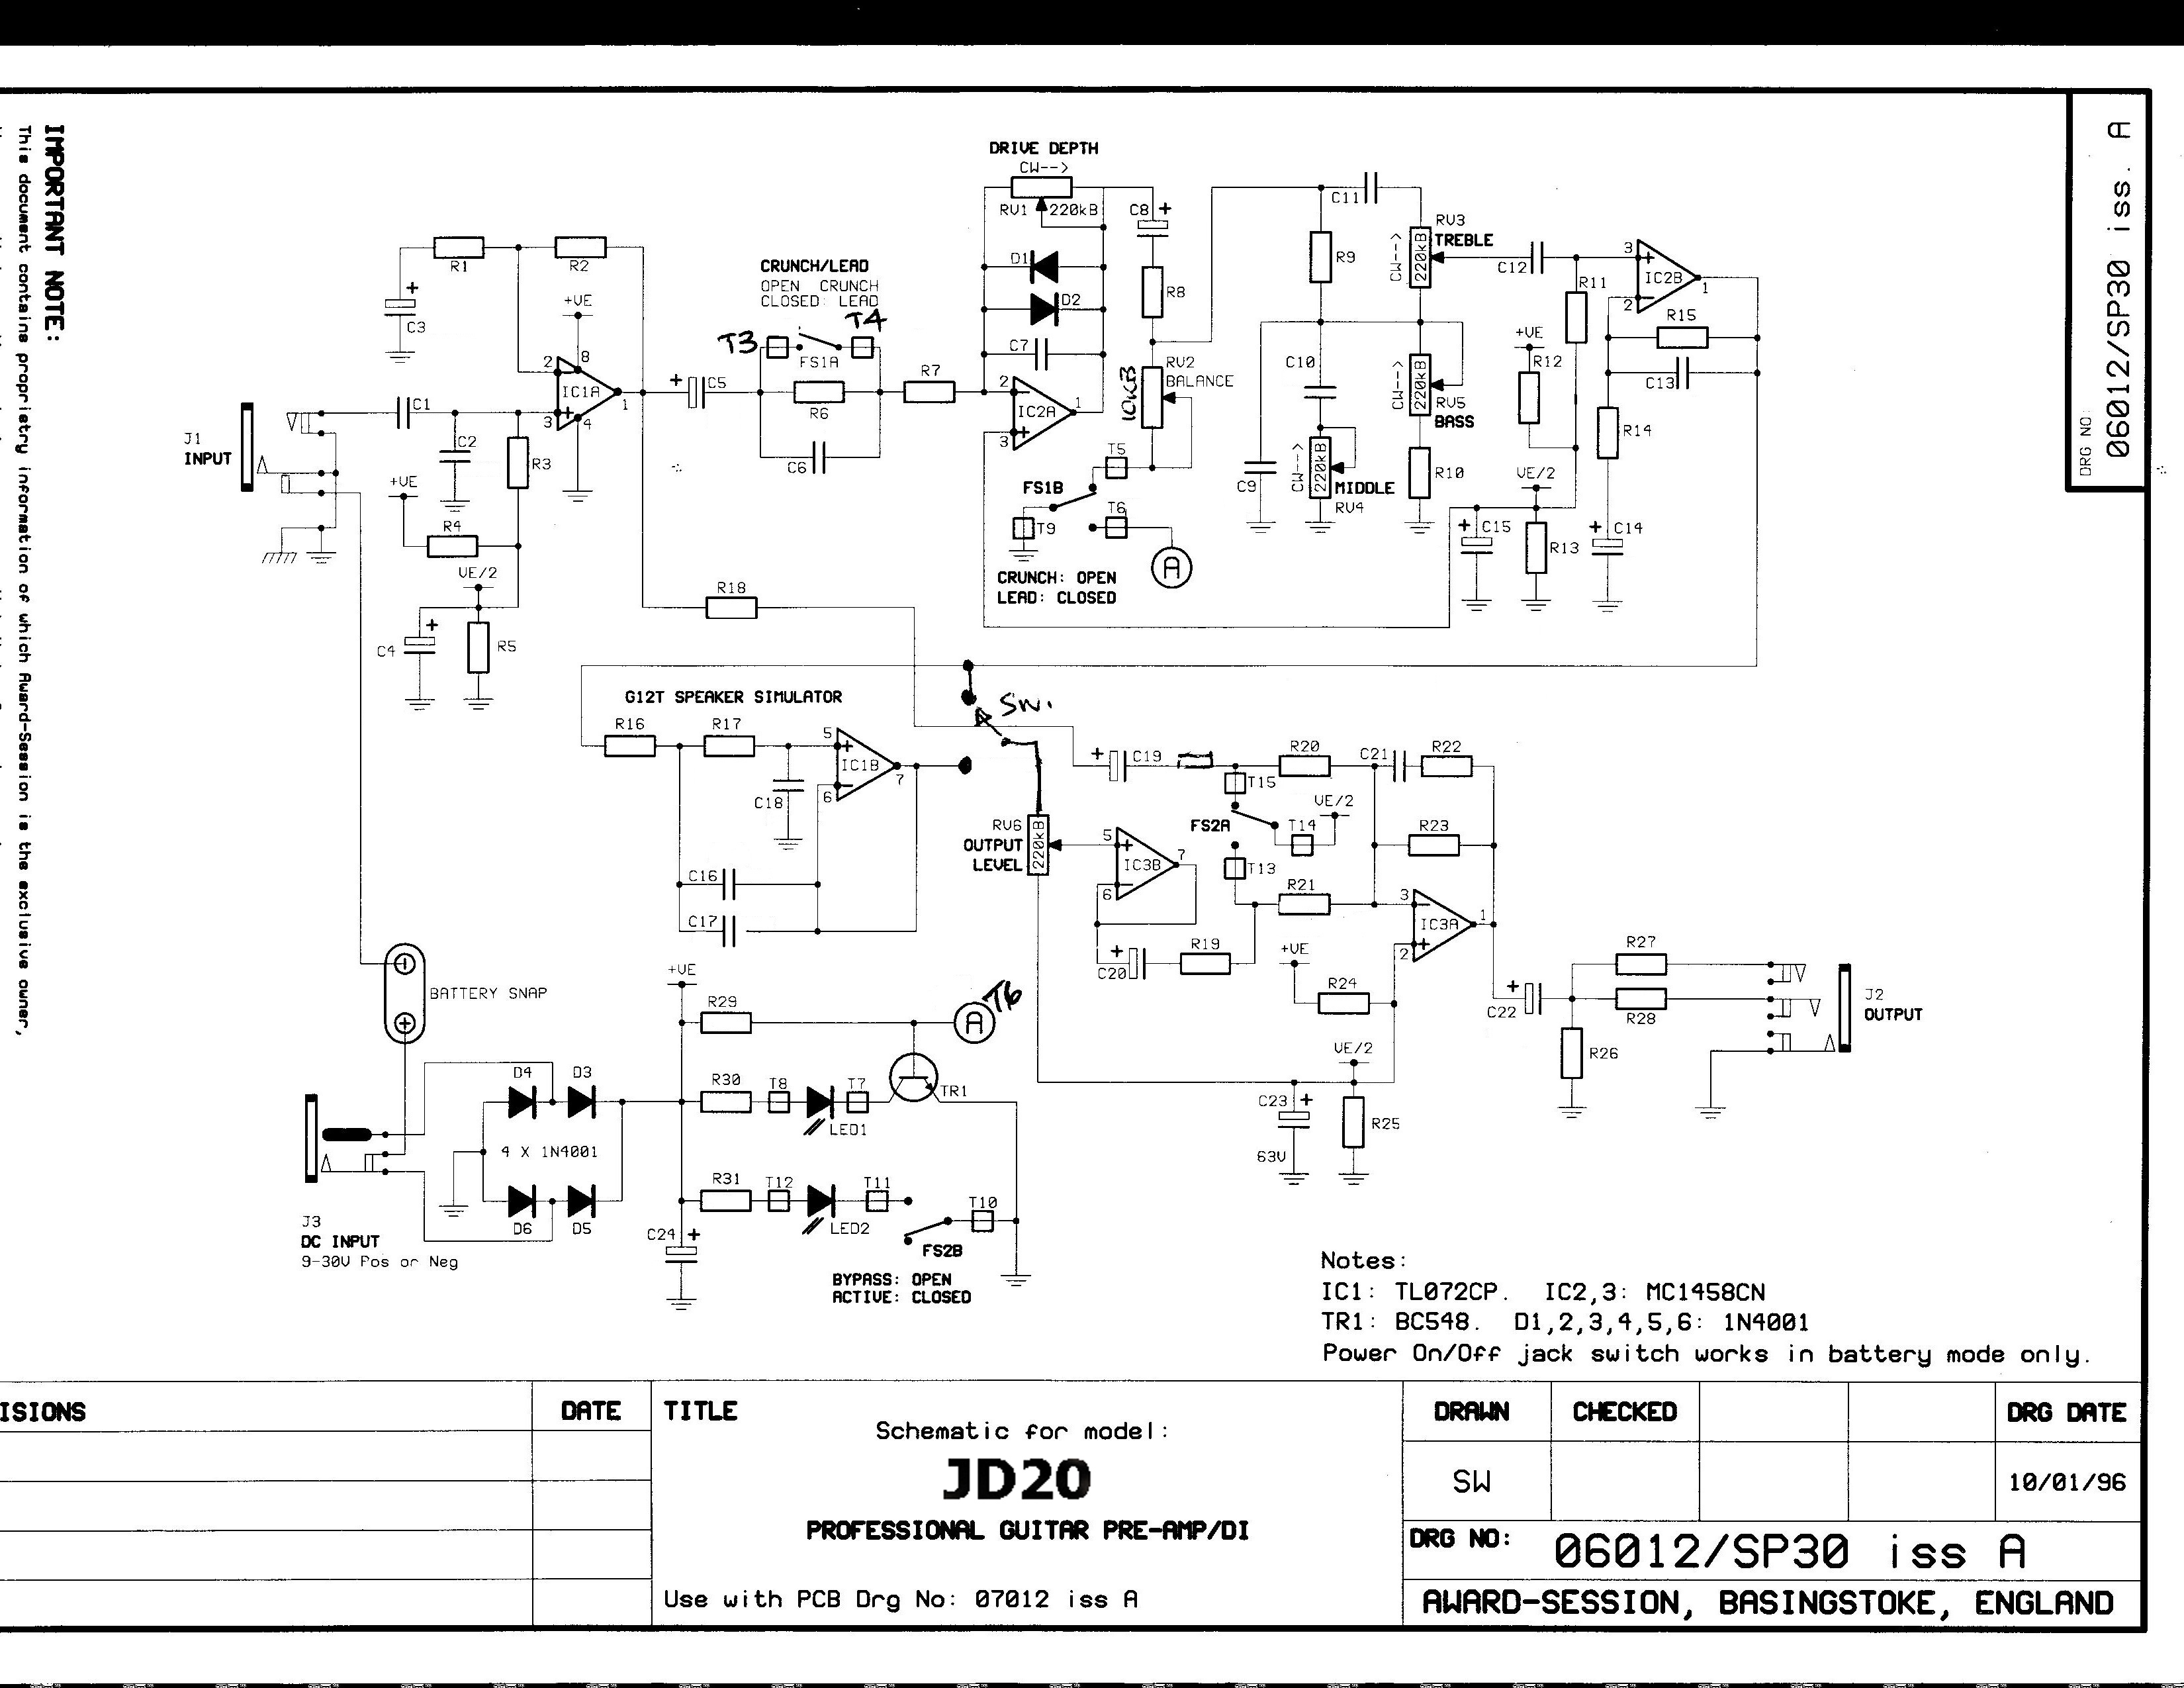 Award Session Manuals. Welcome to award-session.com ... 2006 chevy express wiring diagram free download 